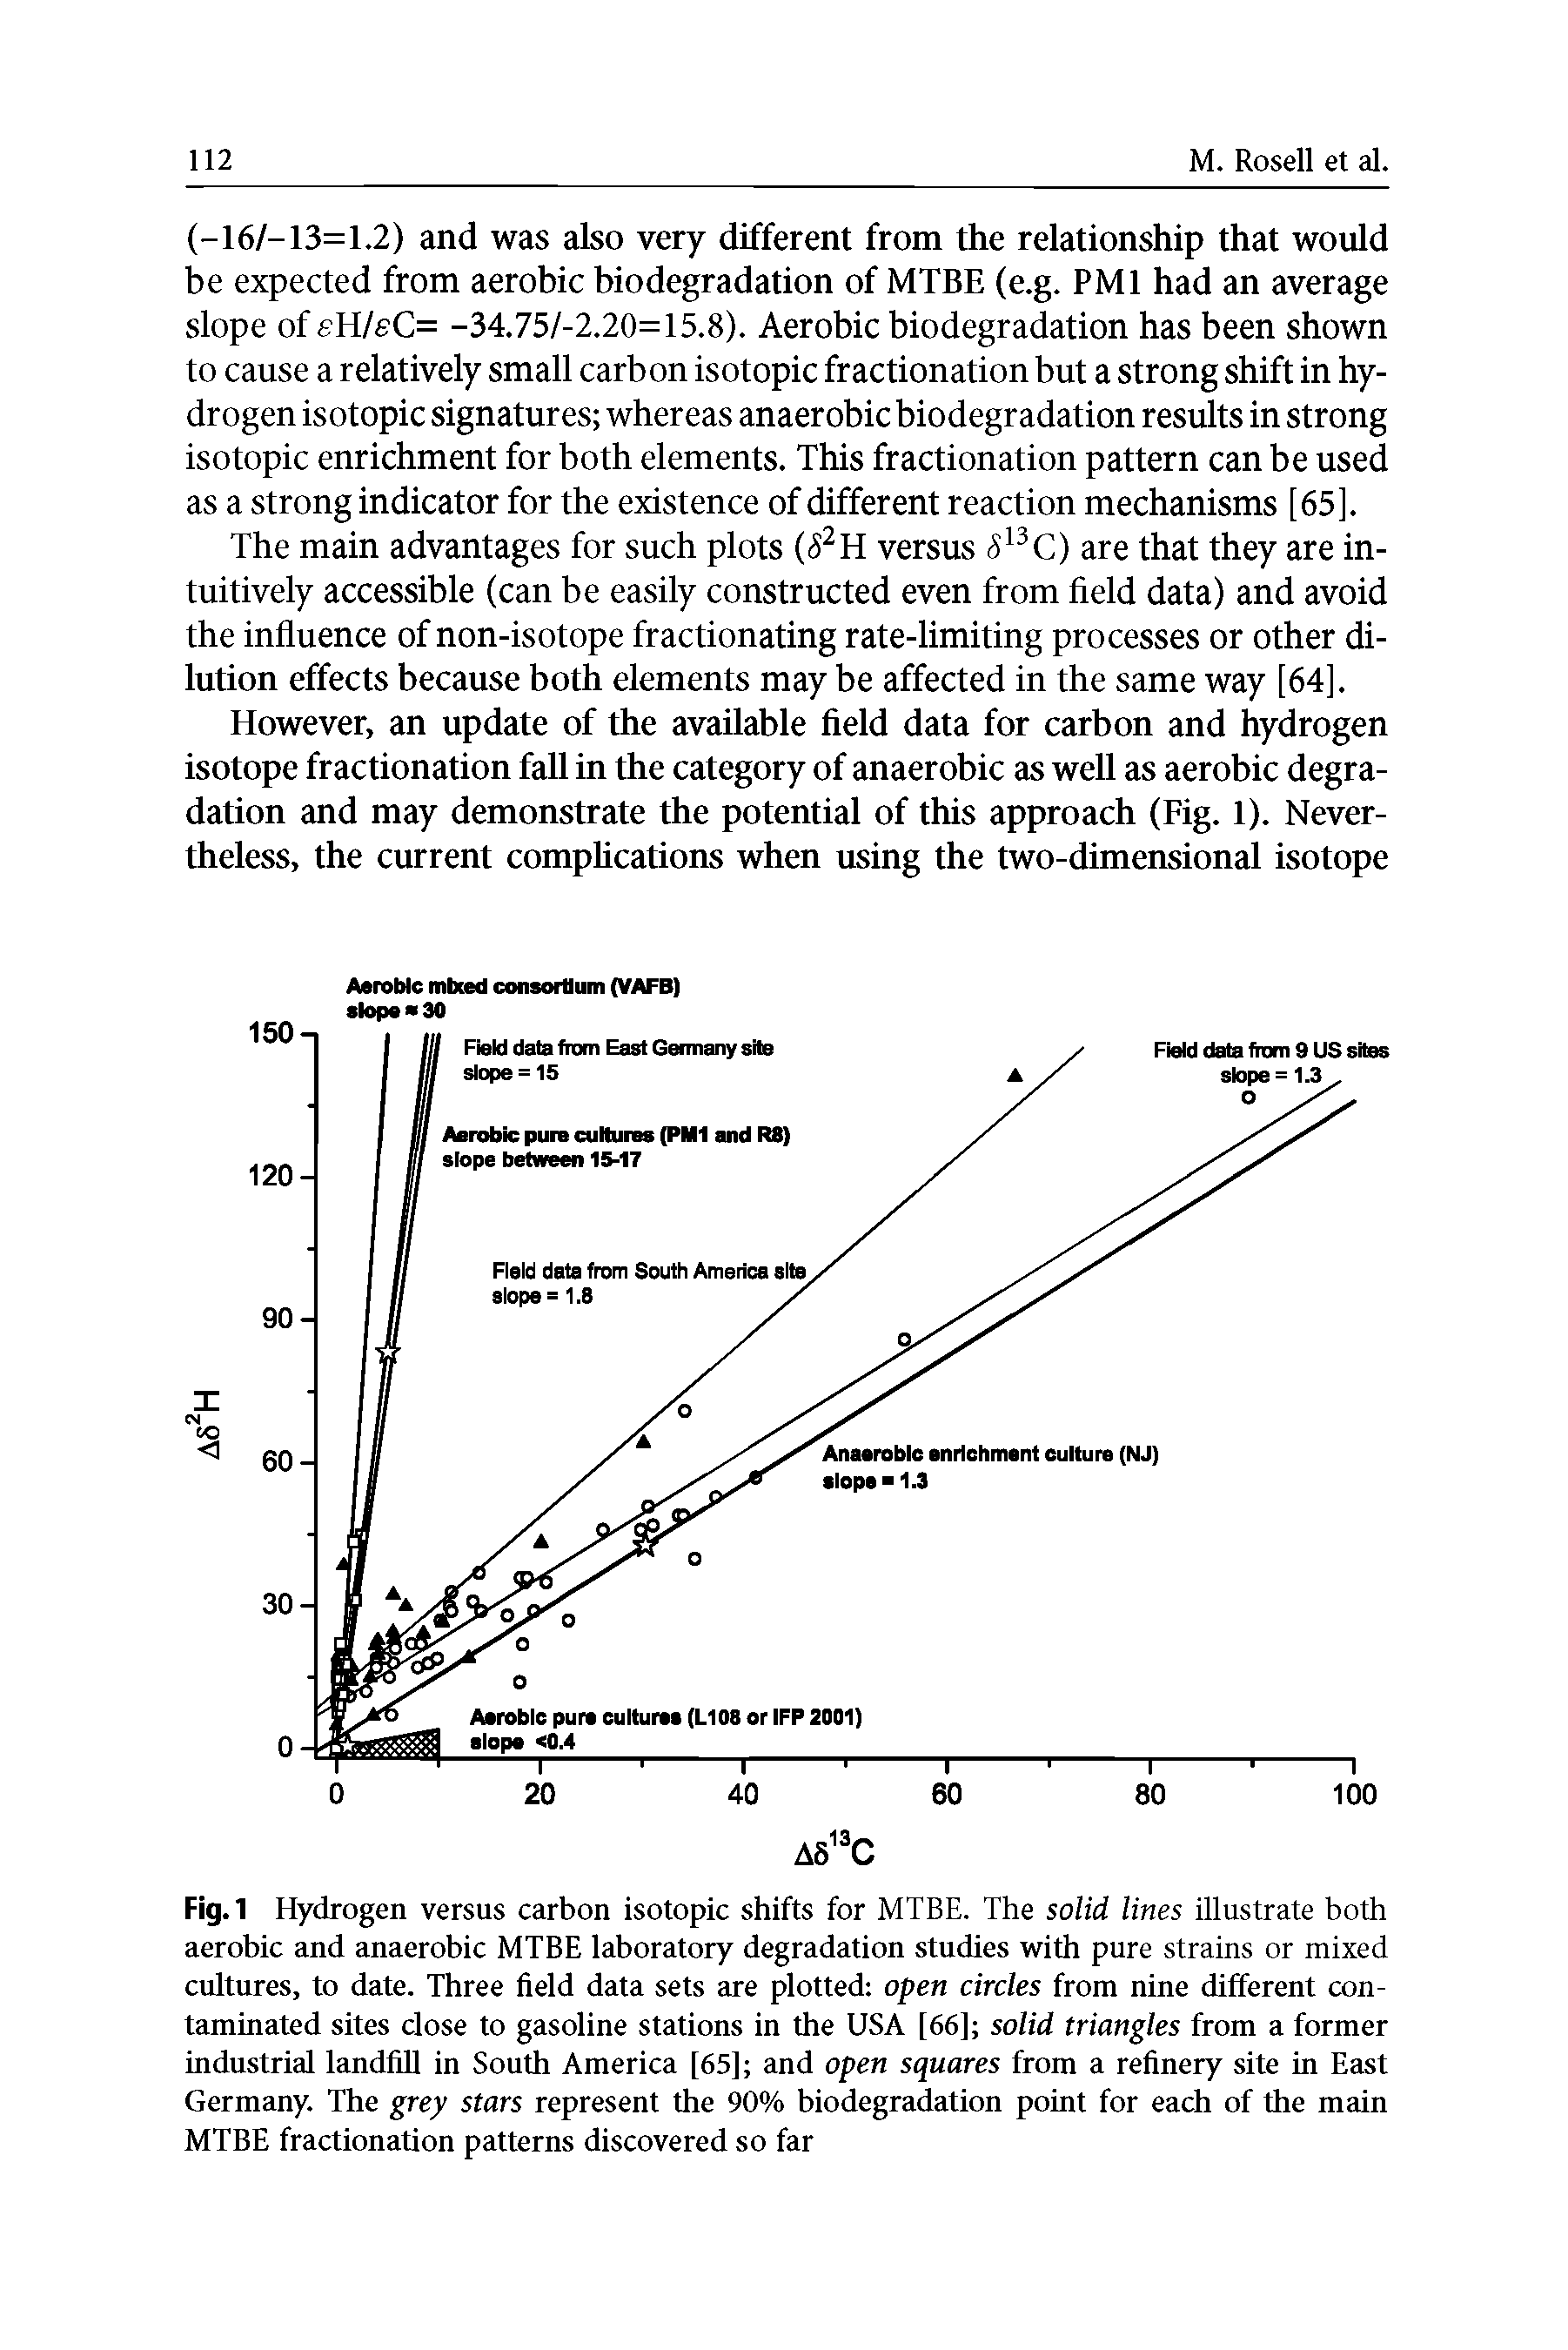 Fig. 1 Hydrogen versus carbon isotopic shifts for MTBE. The solid lines illustrate both aerobic and anaerobic MTBE laboratory degradation studies with pure strains or mixed cultures, to date. Three field data sets are plotted open circles from nine different contaminated sites close to gasoline stations in the USA [66] solid triangles from a former industrial landfill in South America [65] and open squares from a refinery site in East Germany. The grey stars represent the 90% biodegradation point for each of the main MTBE fractionation patterns discovered so far...